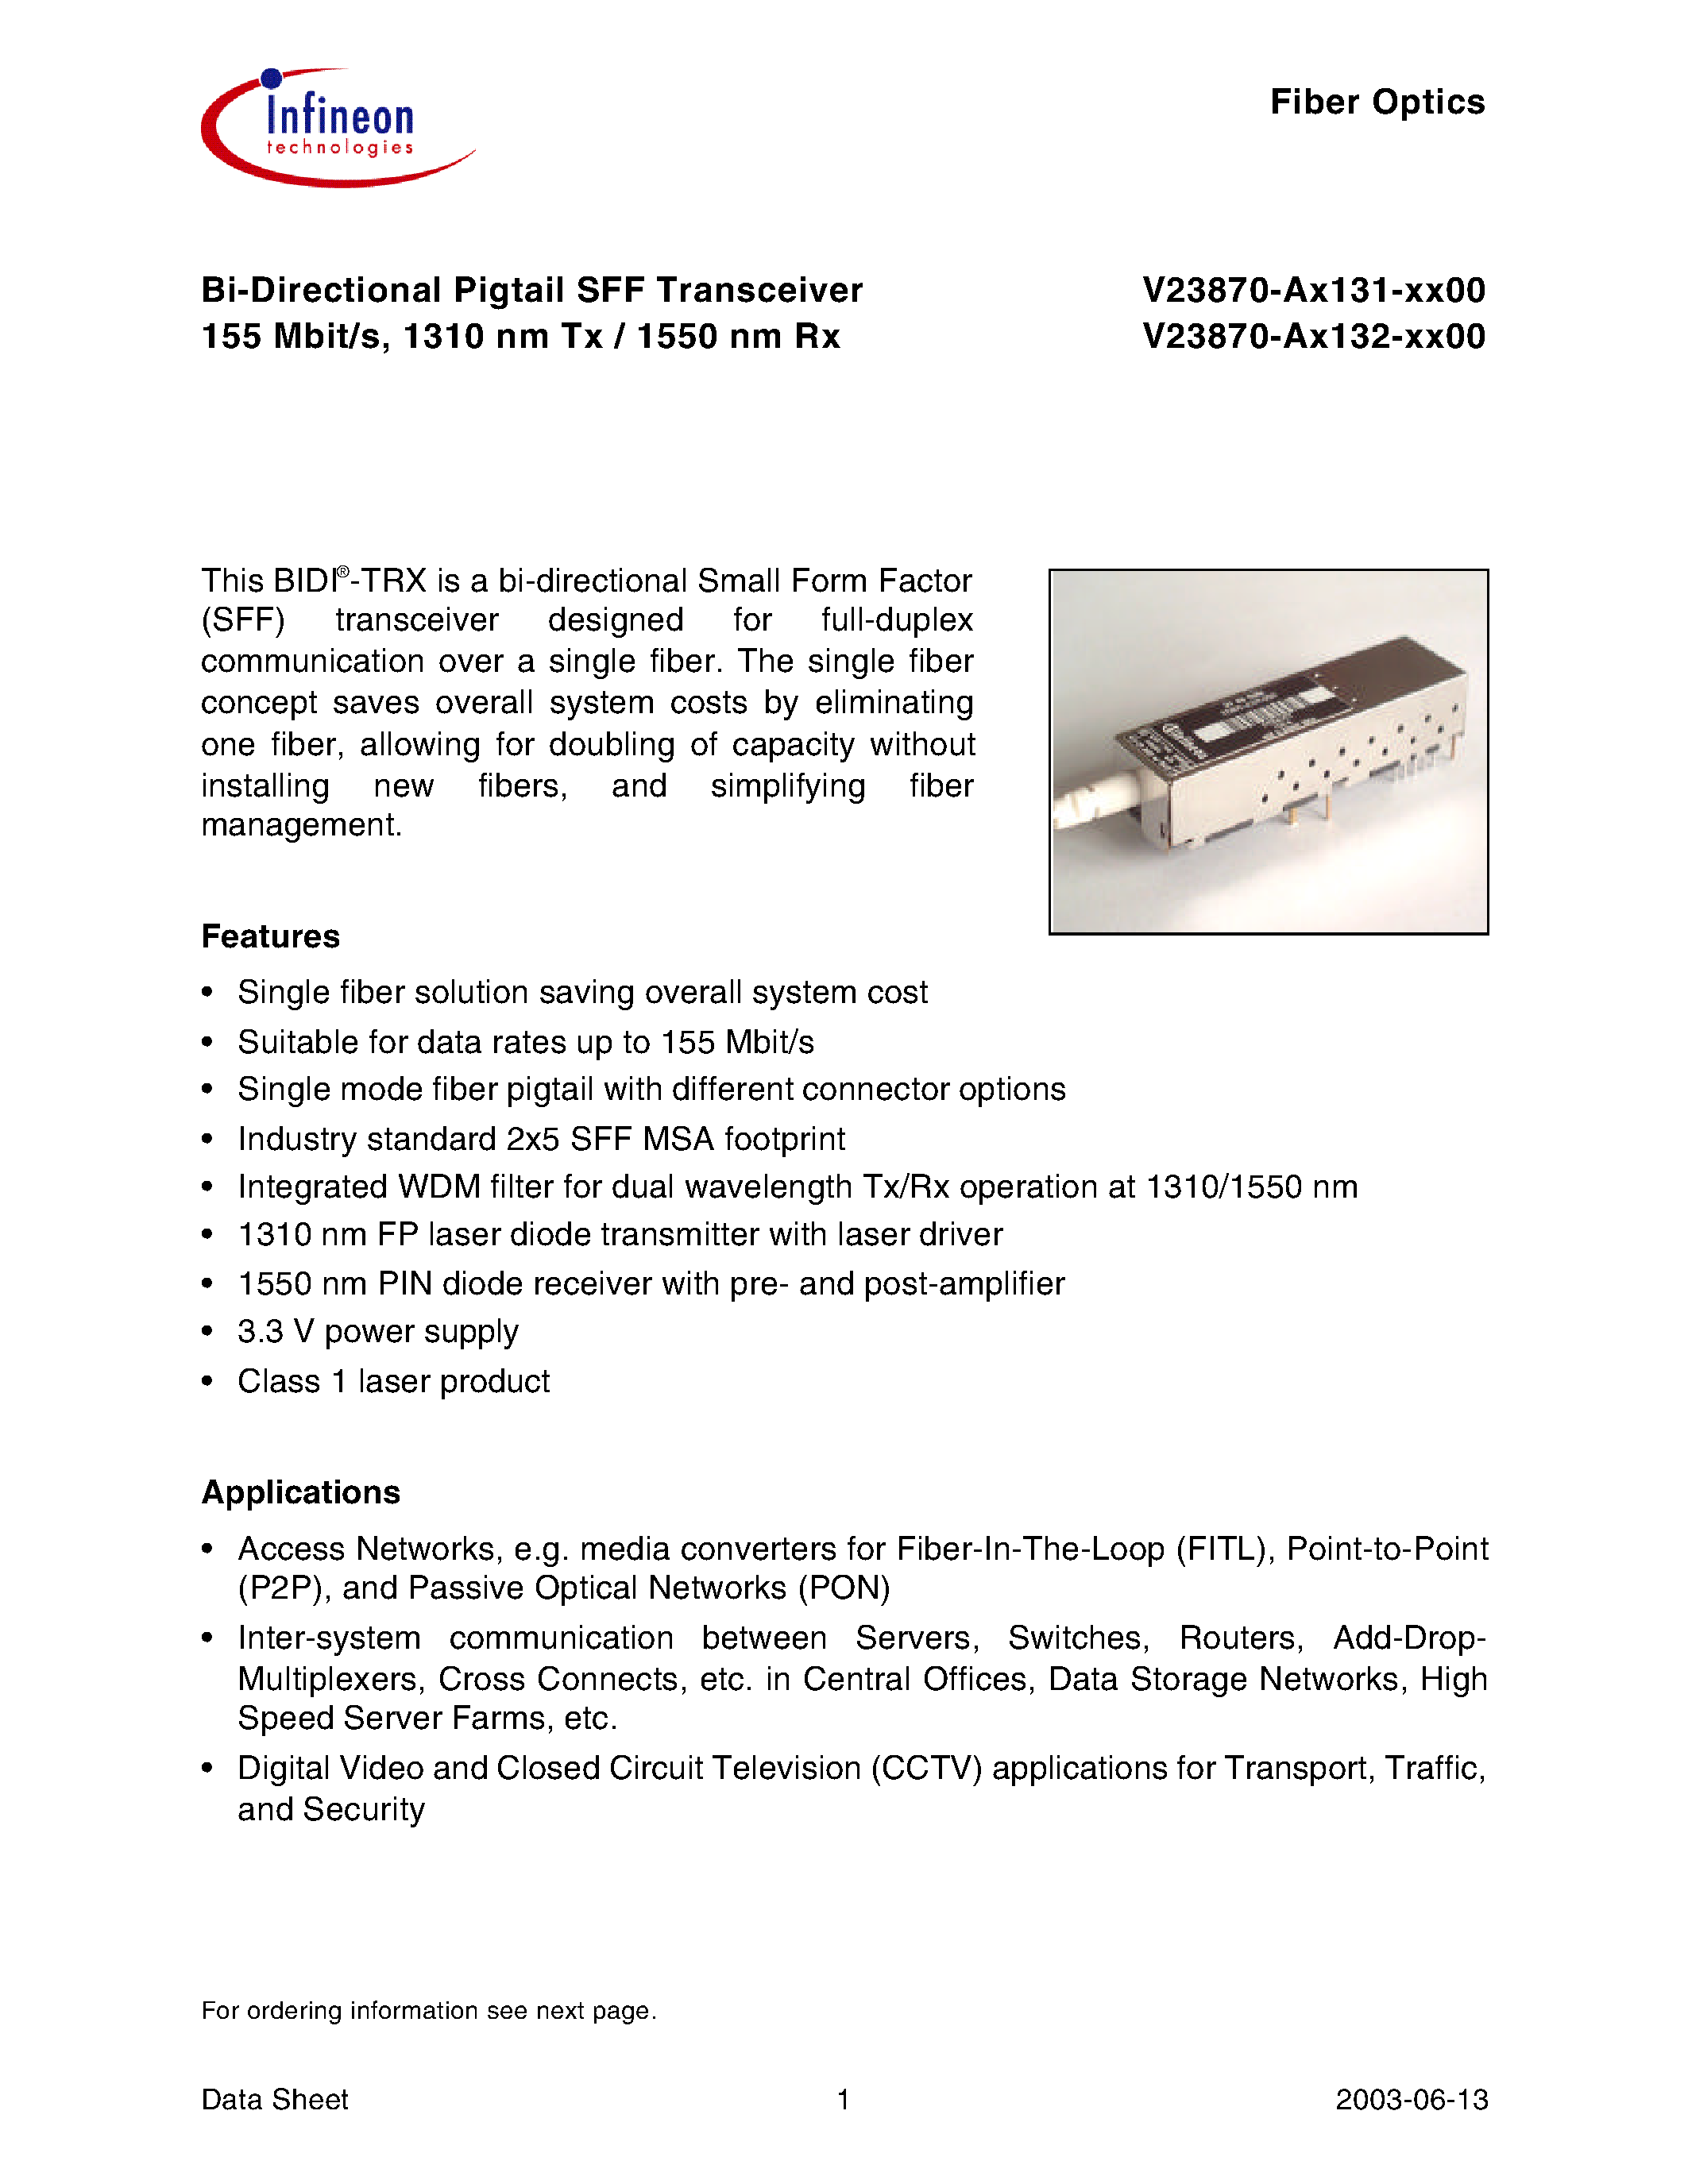 Datasheet V23870-A1132-H500 - Bi-Directional Pigtail SFF Transceiver 155 Mbit/s/ 1310 nm Tx / 1550 nm Rx page 1